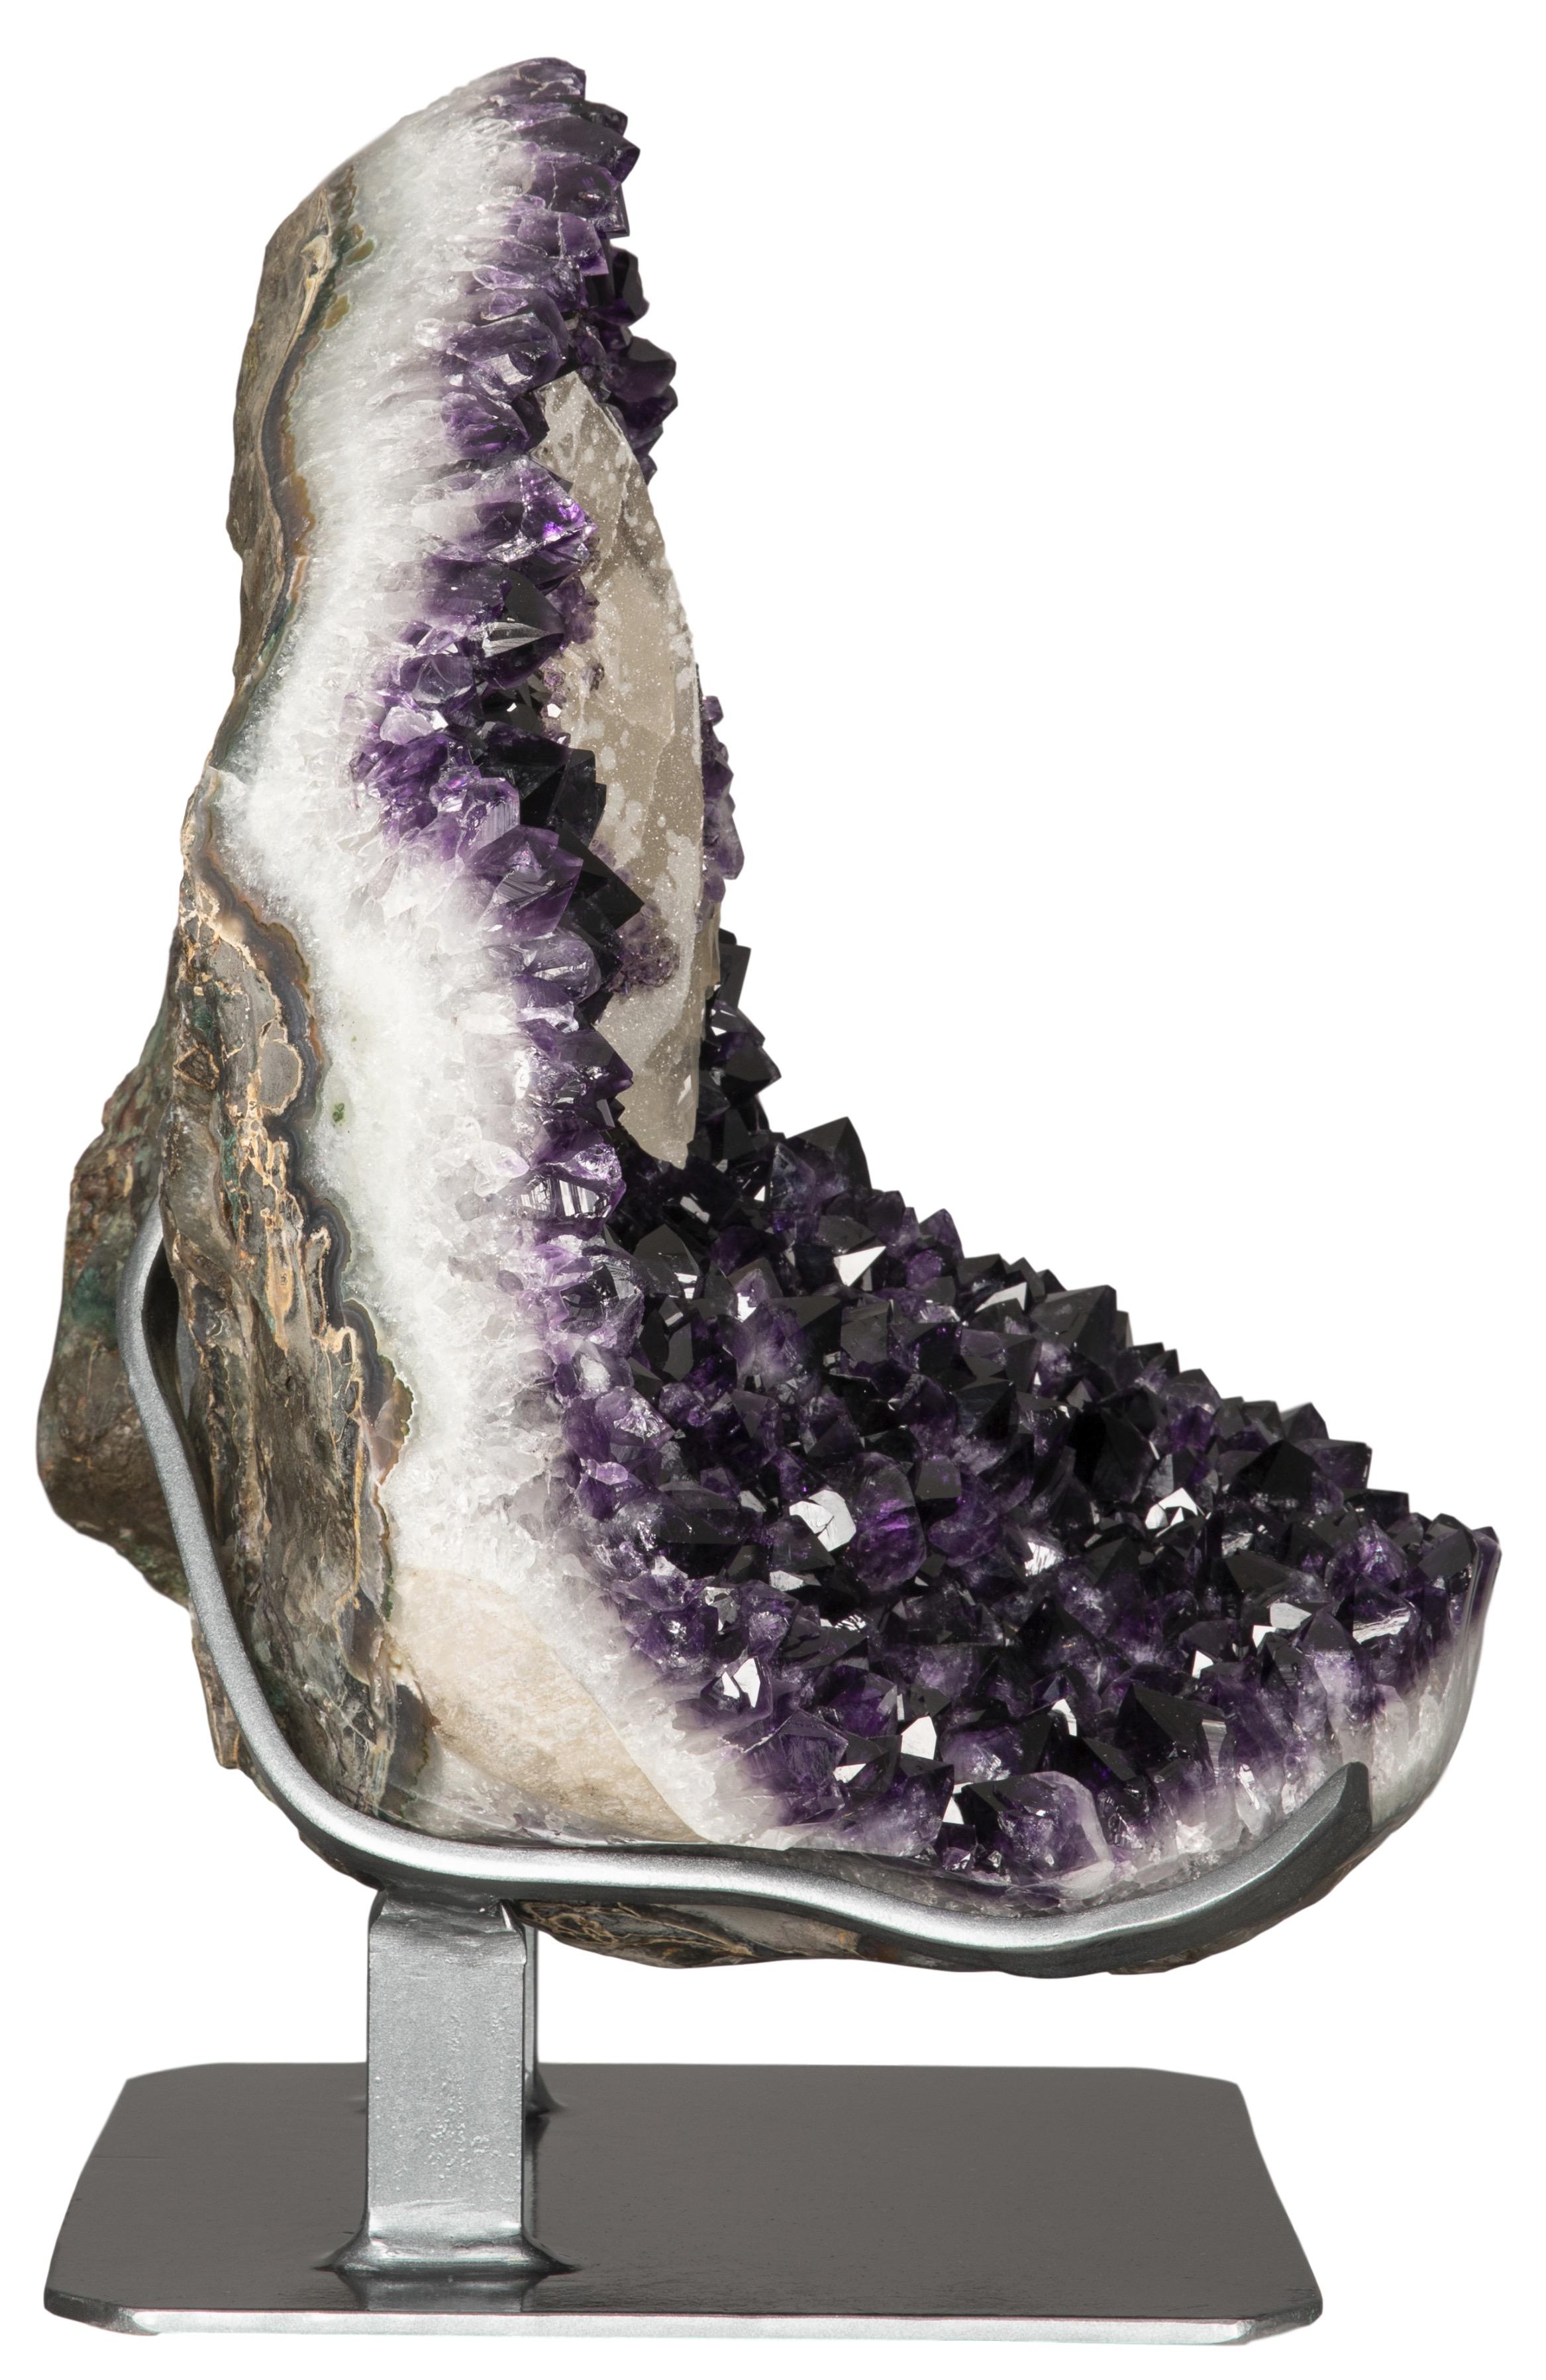 A breath-taking large amethyst cluster, with an incredible amethyst-overlaid calcite formation at the top. 

This formation is unusual for its overall scale and the extremely high quality of its intense violet amethyst crystals. Furthermore, the